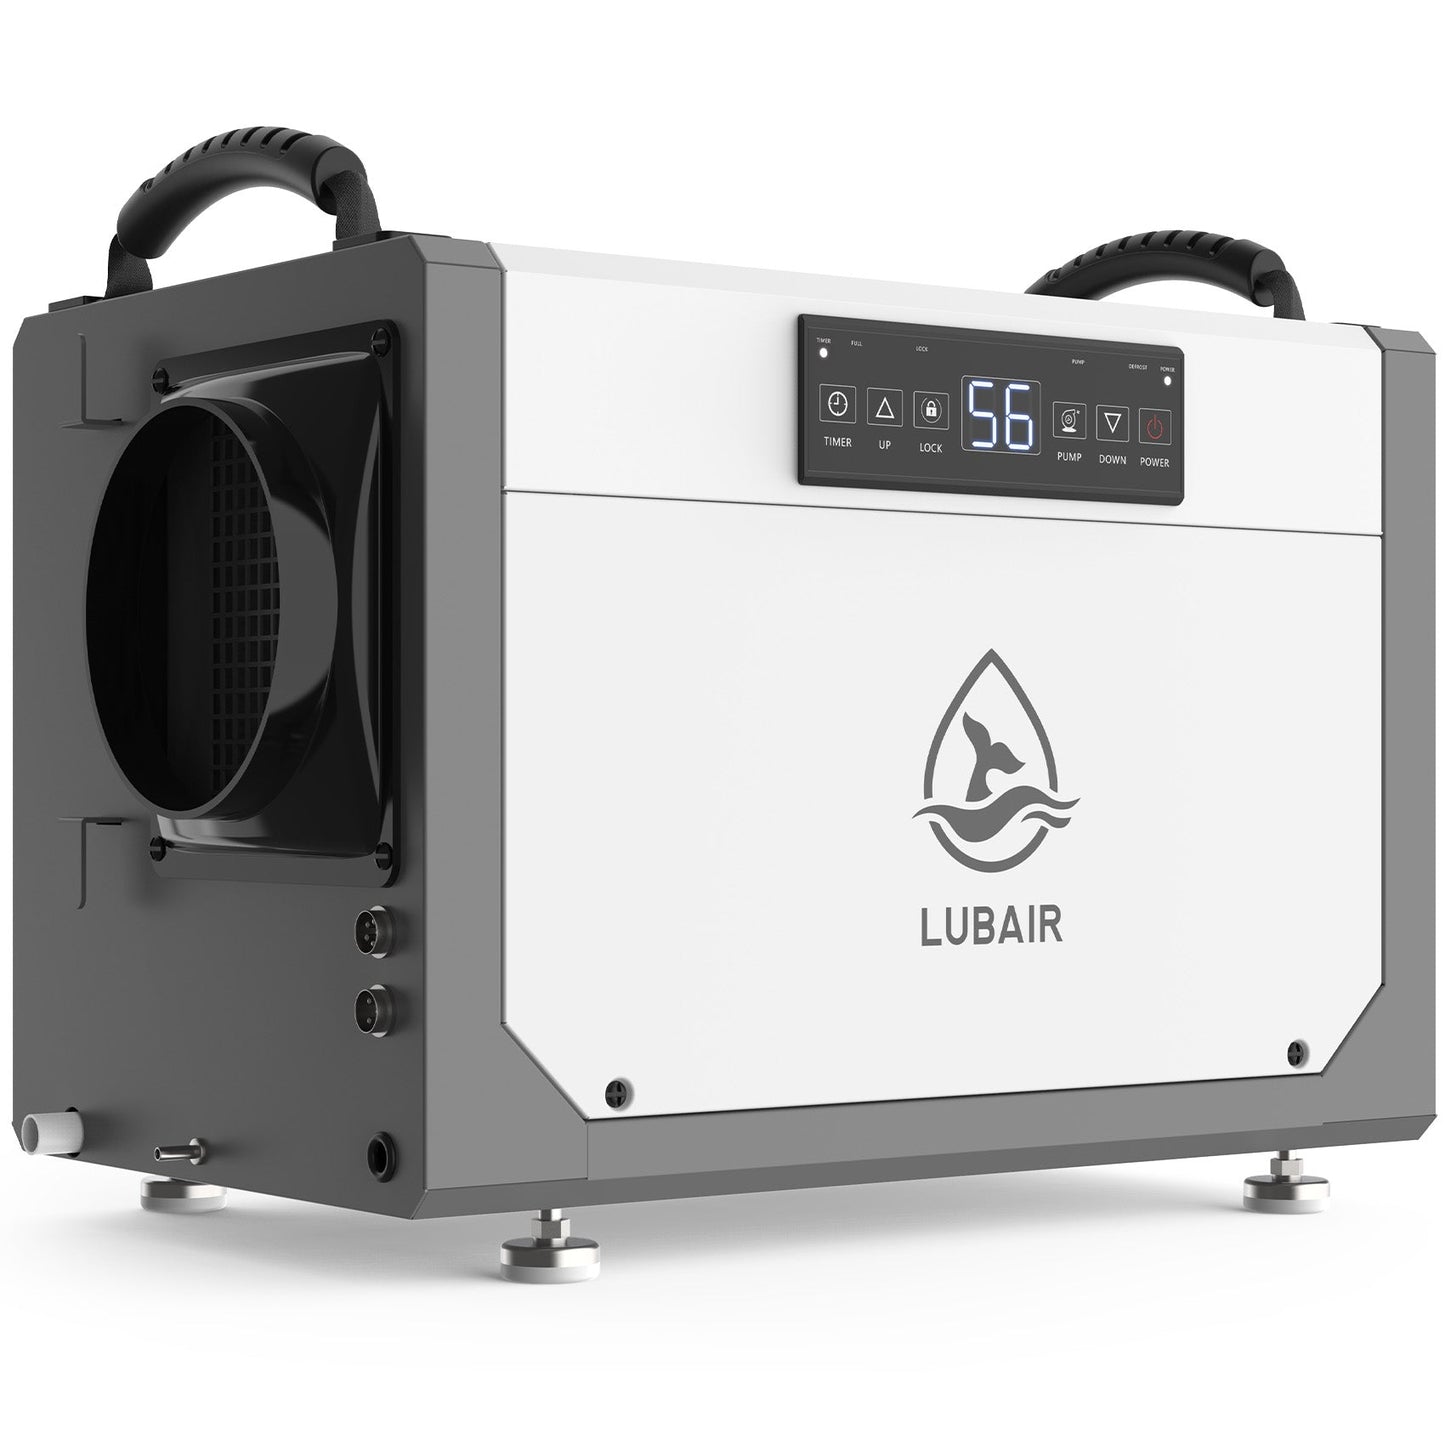 LUBAIR 113 Pints Crawl Space Dehumidifier with Pump, Commercial Dehumidifier with Drainage Hose, Coverage Area 1400 Sq.ft